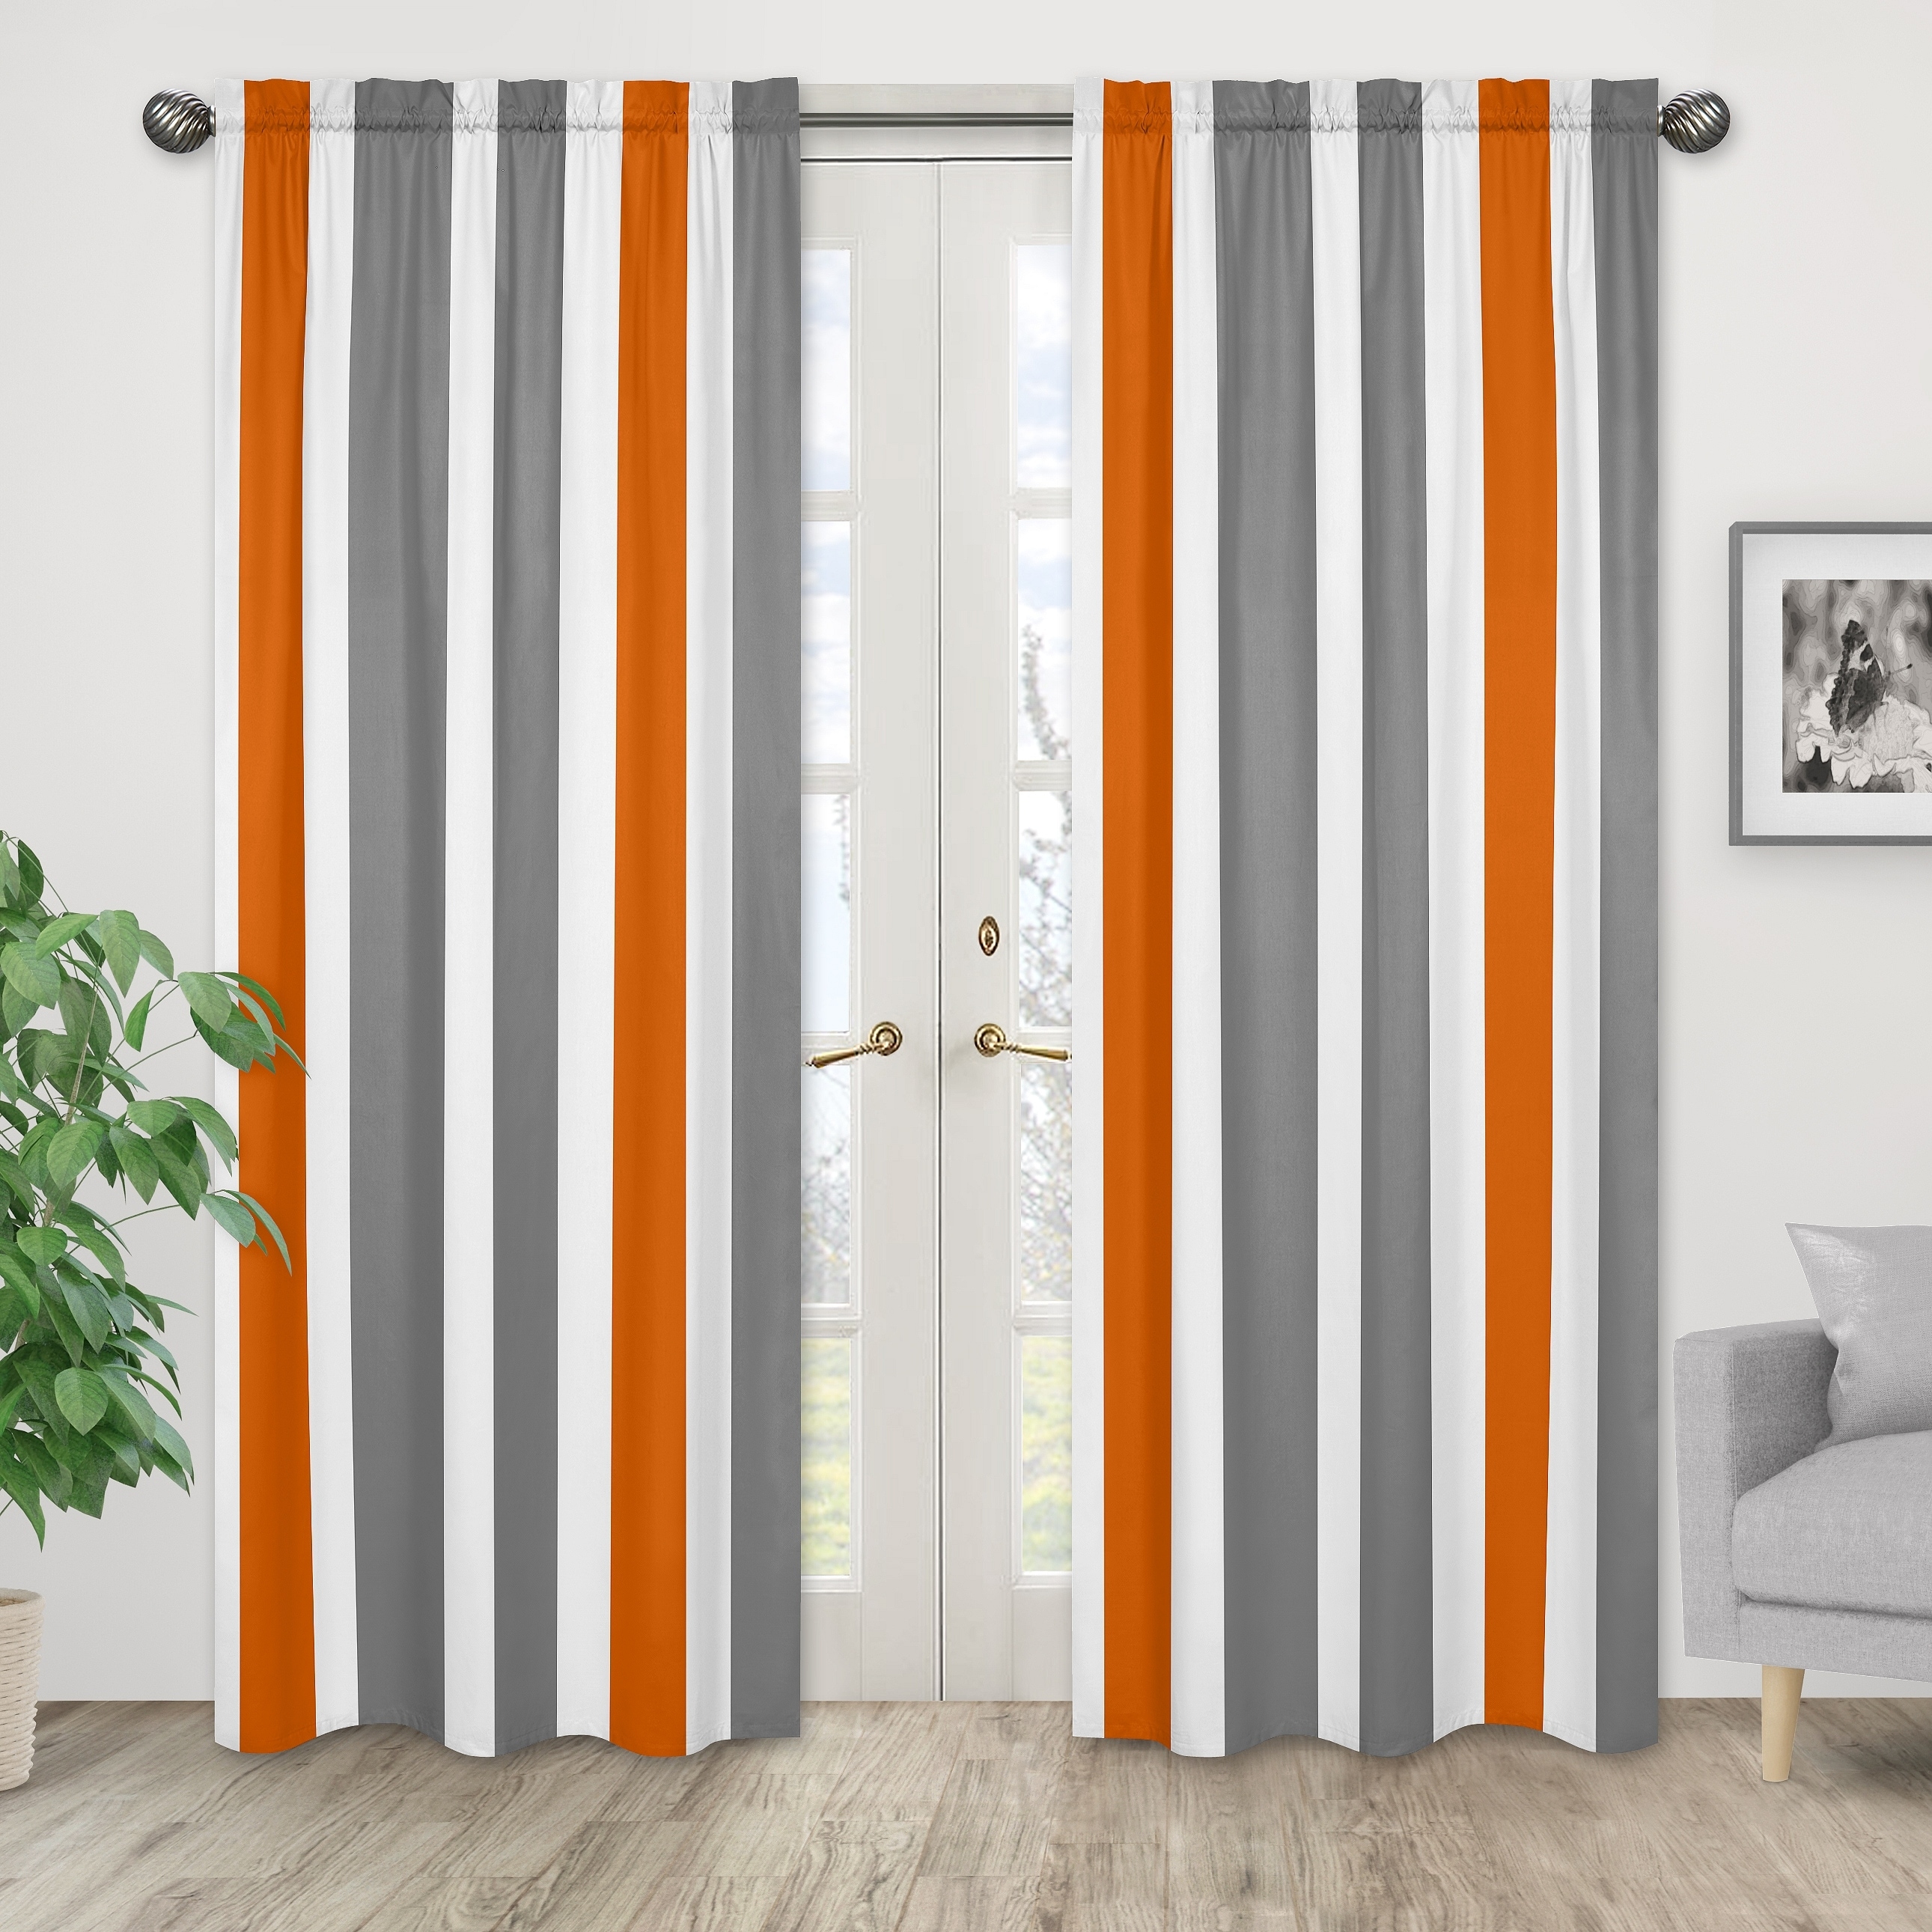 https://ak1.ostkcdn.com/images/products/is/images/direct/3d6b6950f4b900b05c5ee5e356aa0cdee6e38842/Sweet-Jojo-Designs-Stripe-Collection-Gray-and-Orange-Window-Curtain-Panels.jpg